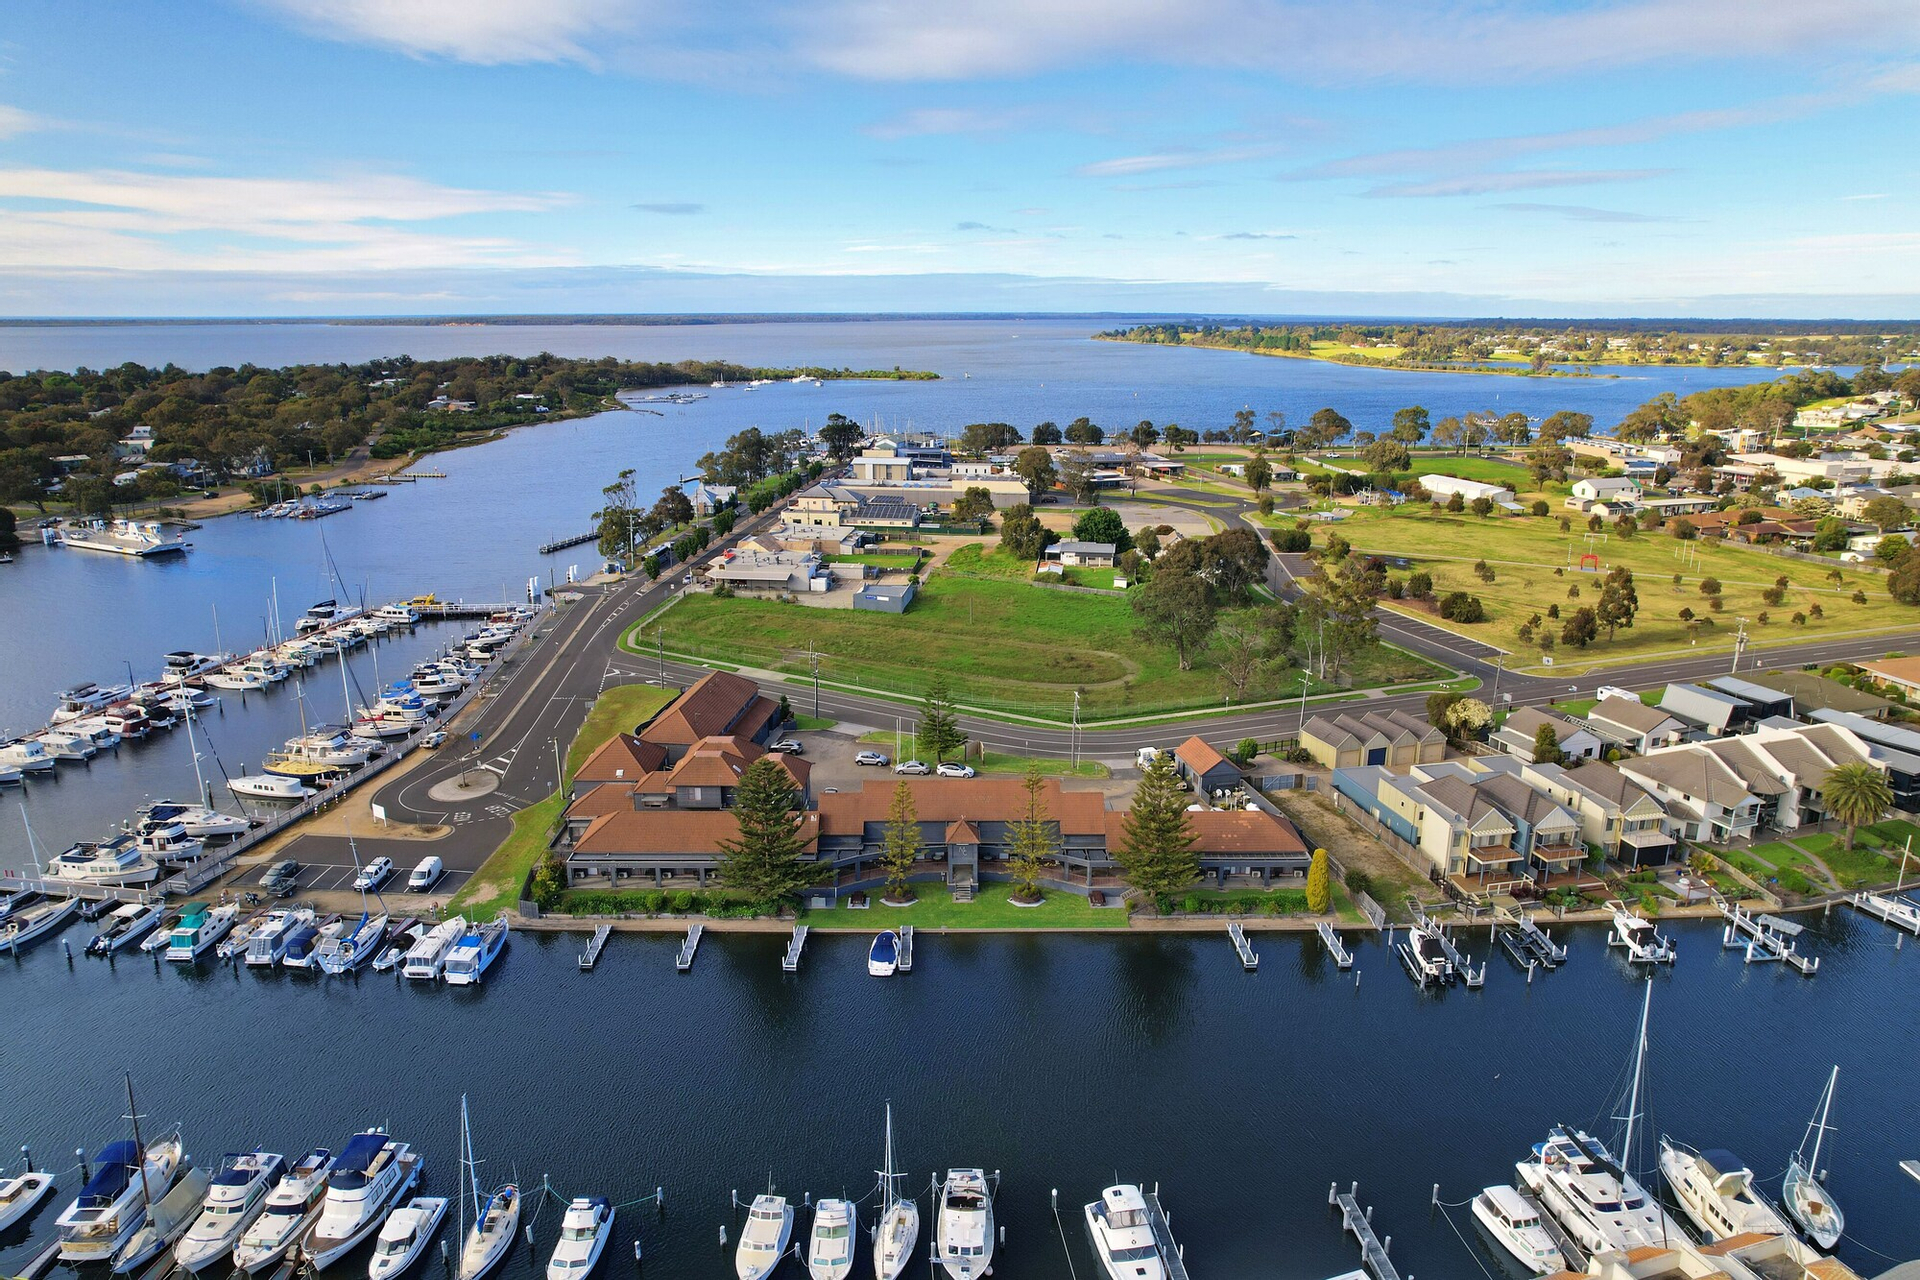 Exterior & Views 1, Mariners Cove at Paynesville Motel & Apartments, E. Gippsland - Bairnsdale